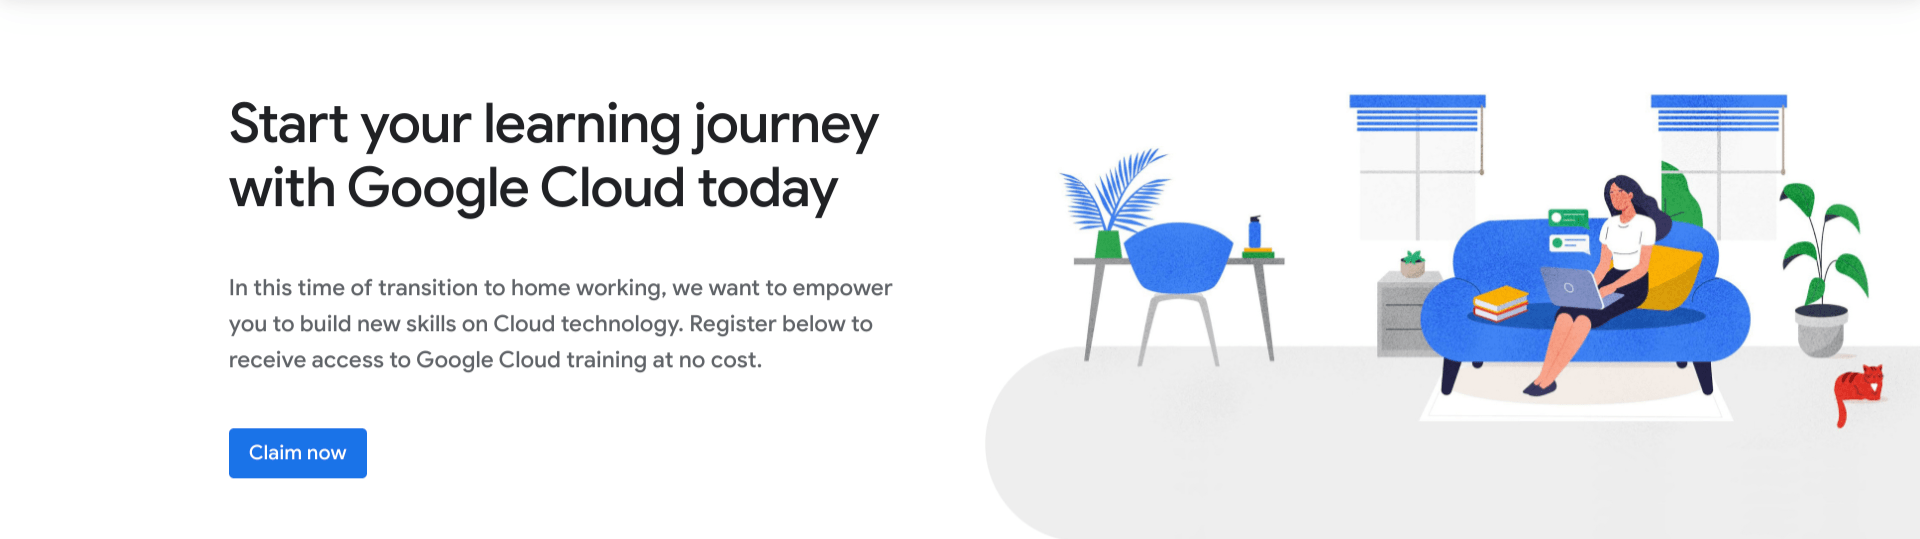 Start your learning journey with Google Cloud today